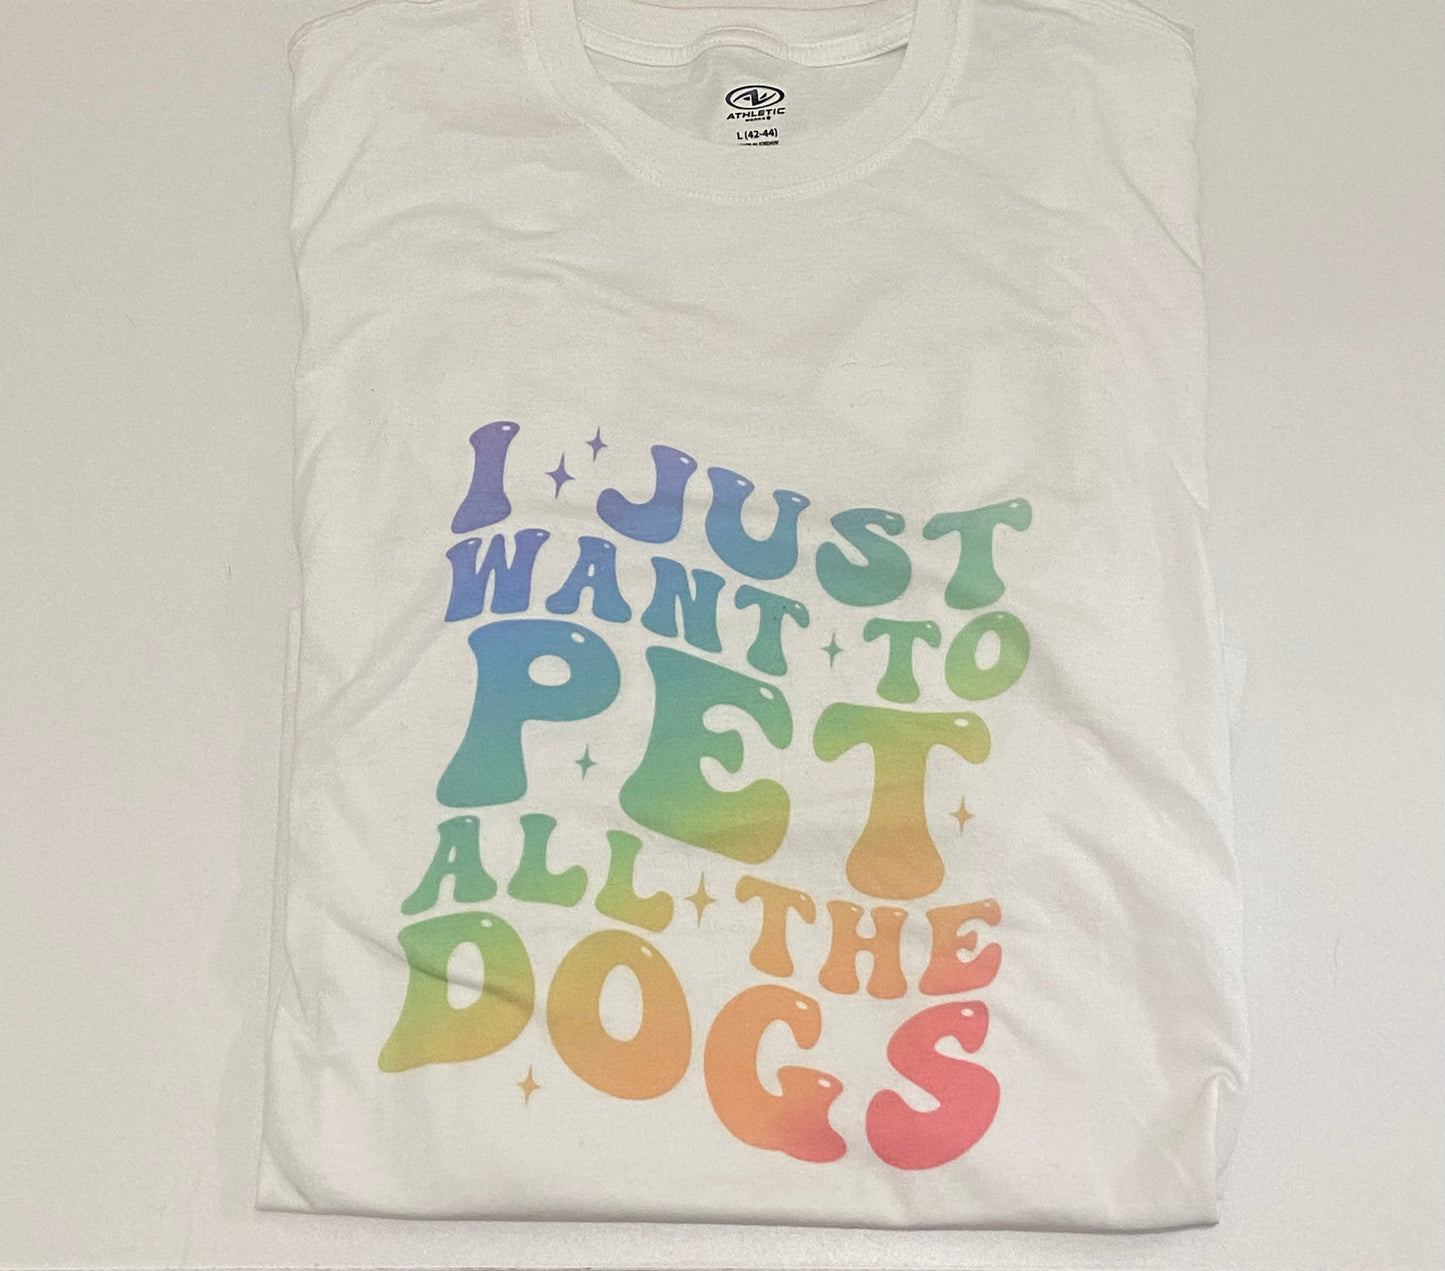 Pet All The Dogs Tshirt